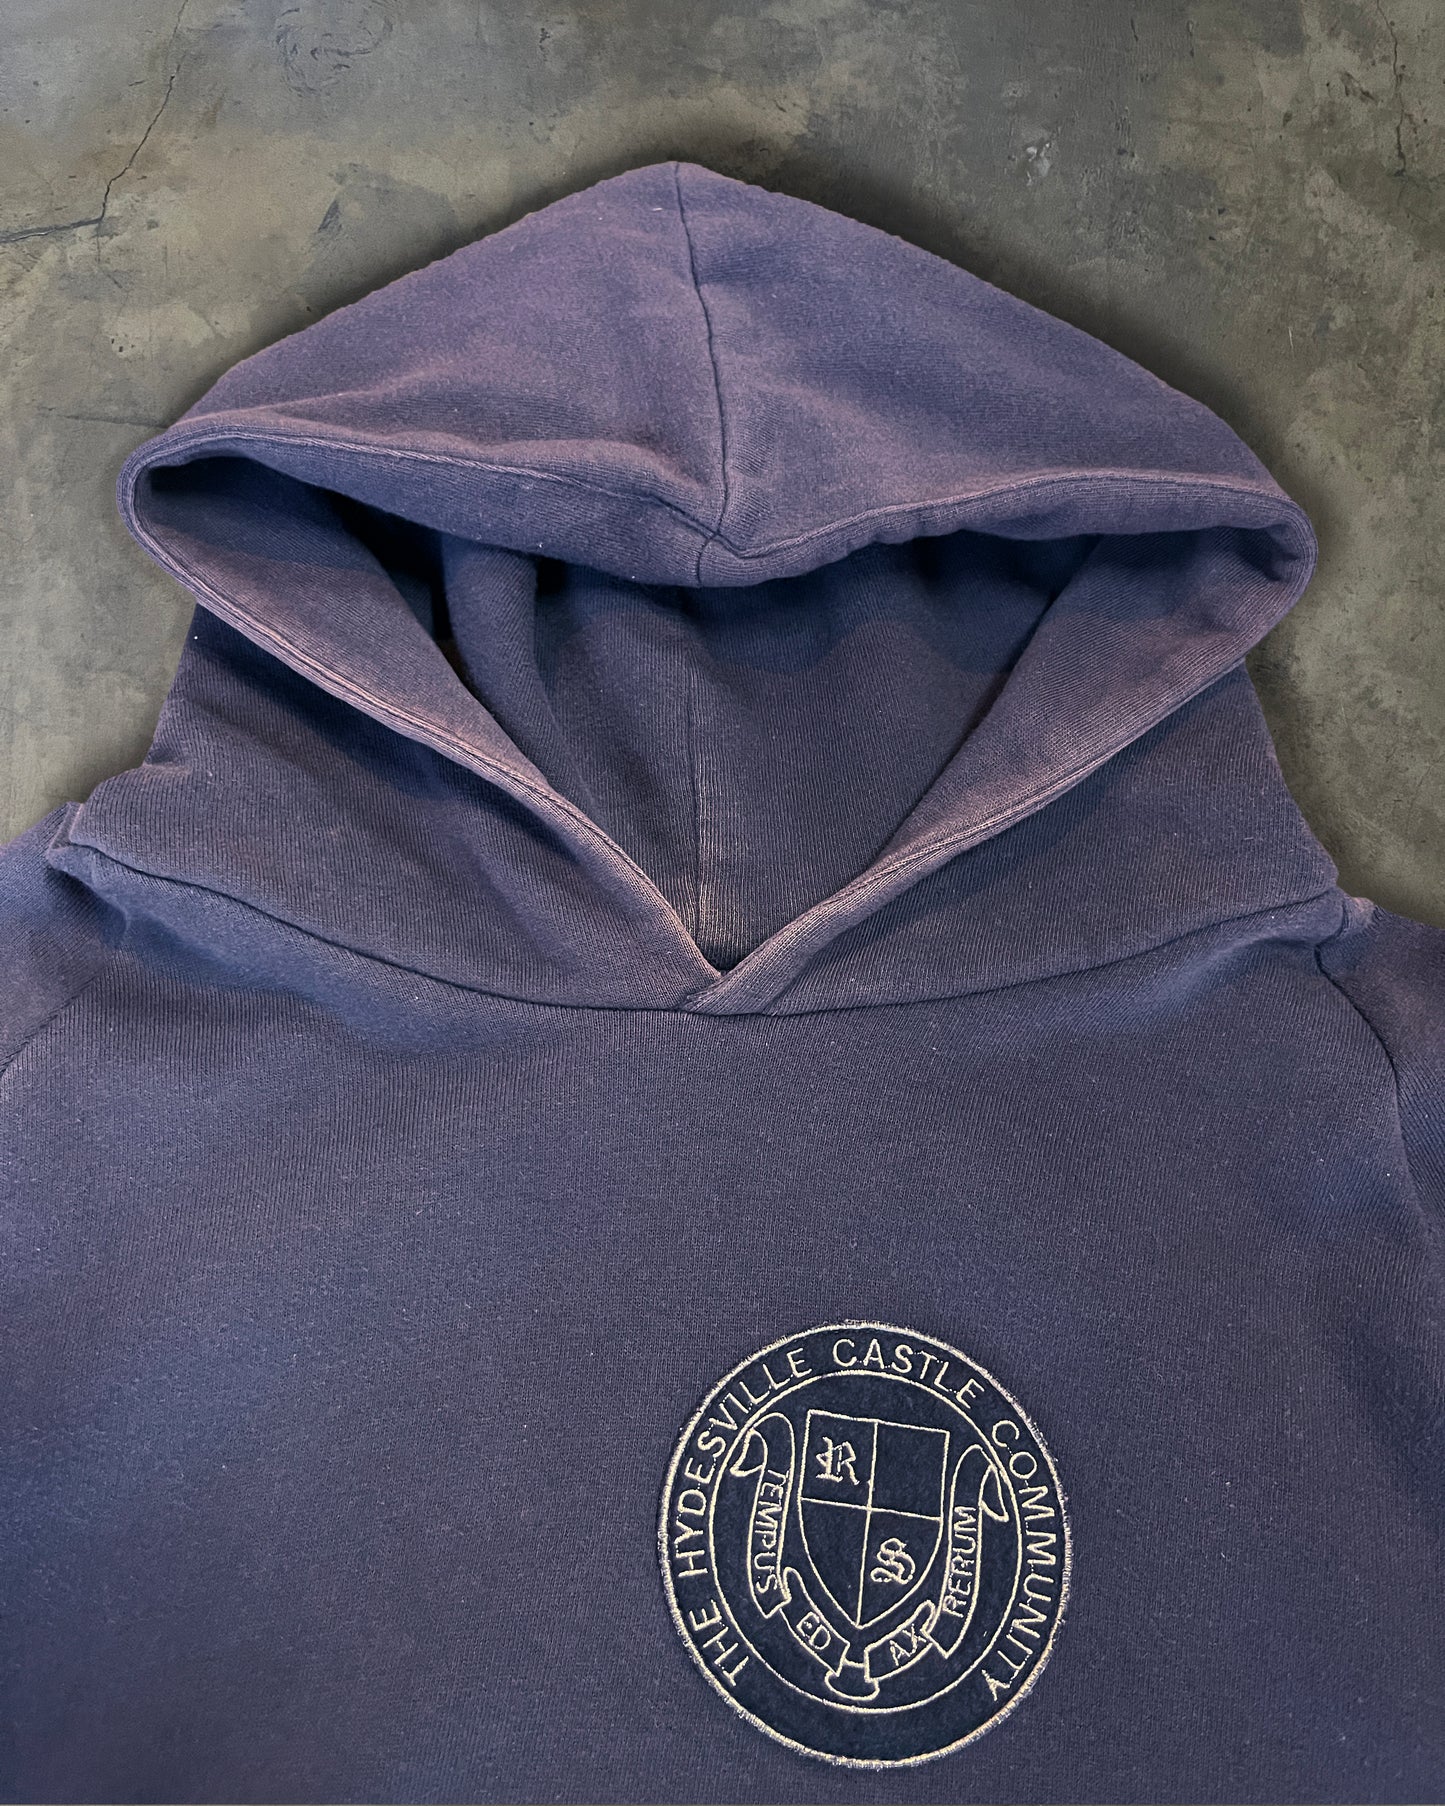 RAF SIMONS AW2000-2001 “CONFUSION” PATCH WORK HOODIE.